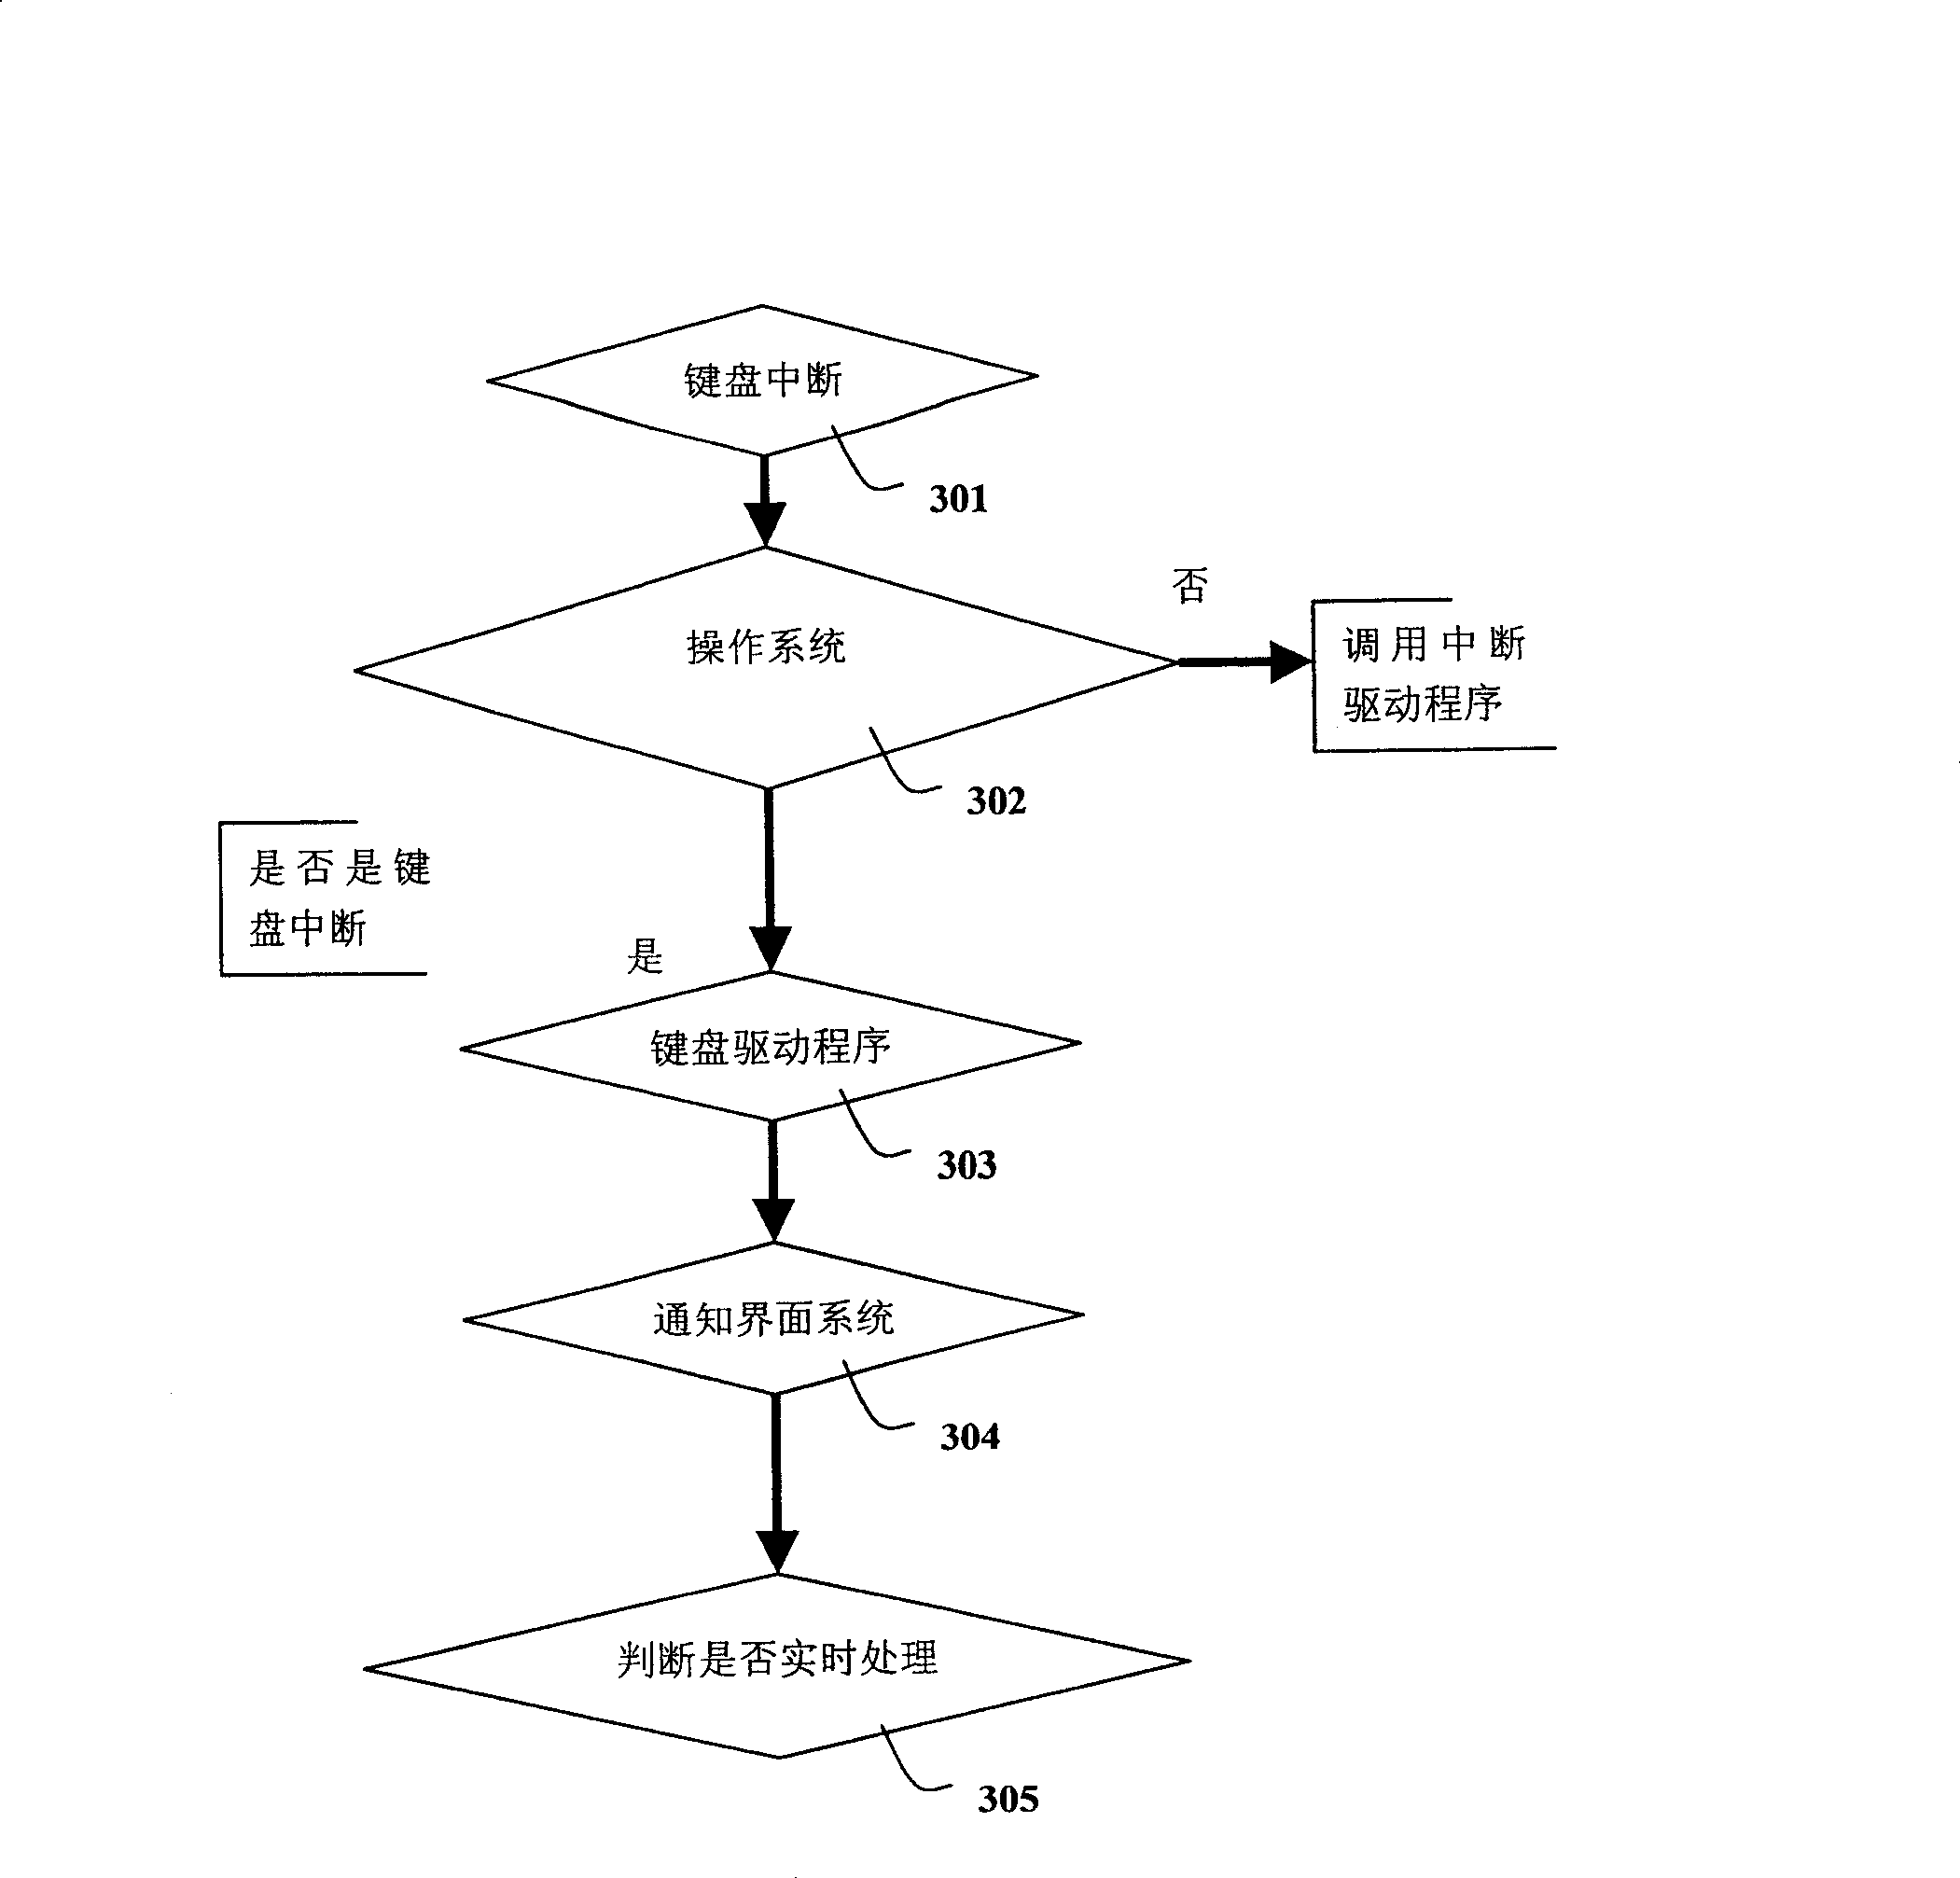 Method for real-time processing of system key on embedded apparatus